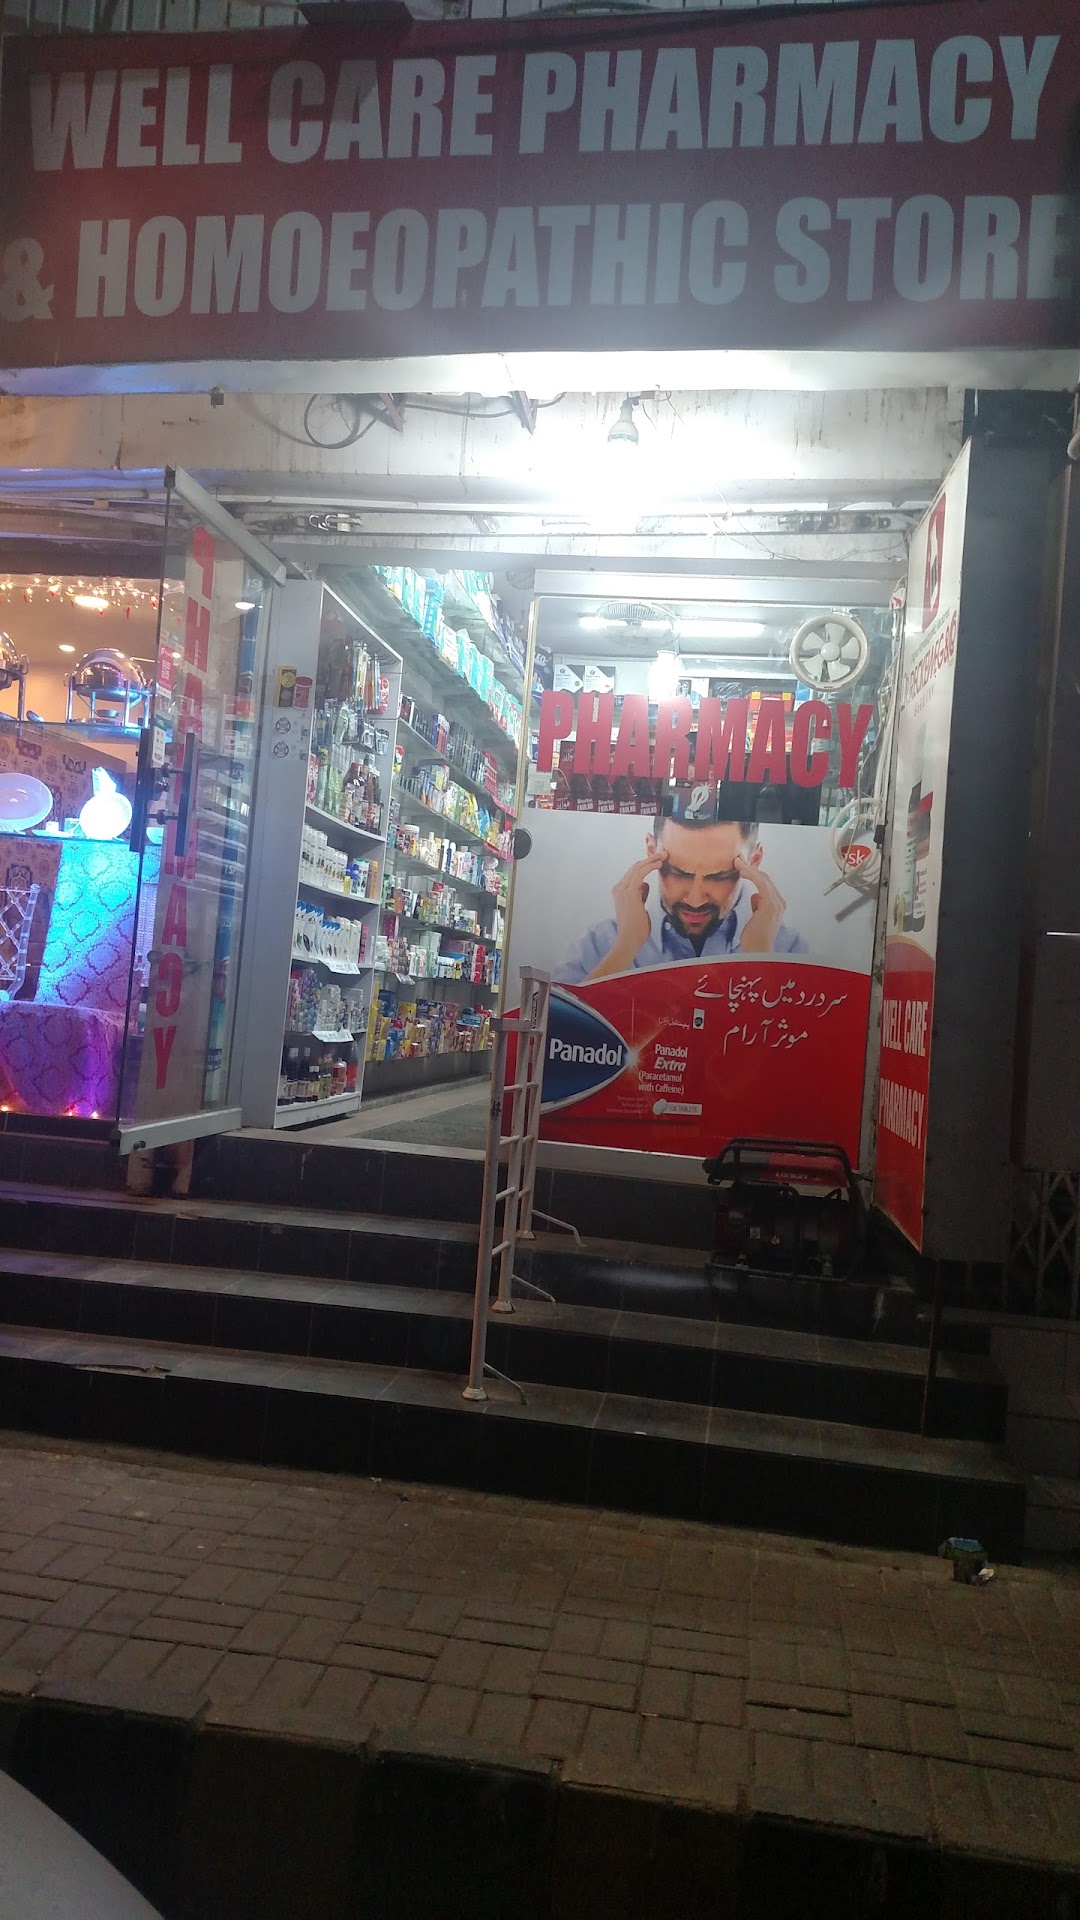 Well Care Pharmacy & Homoeopathic Store